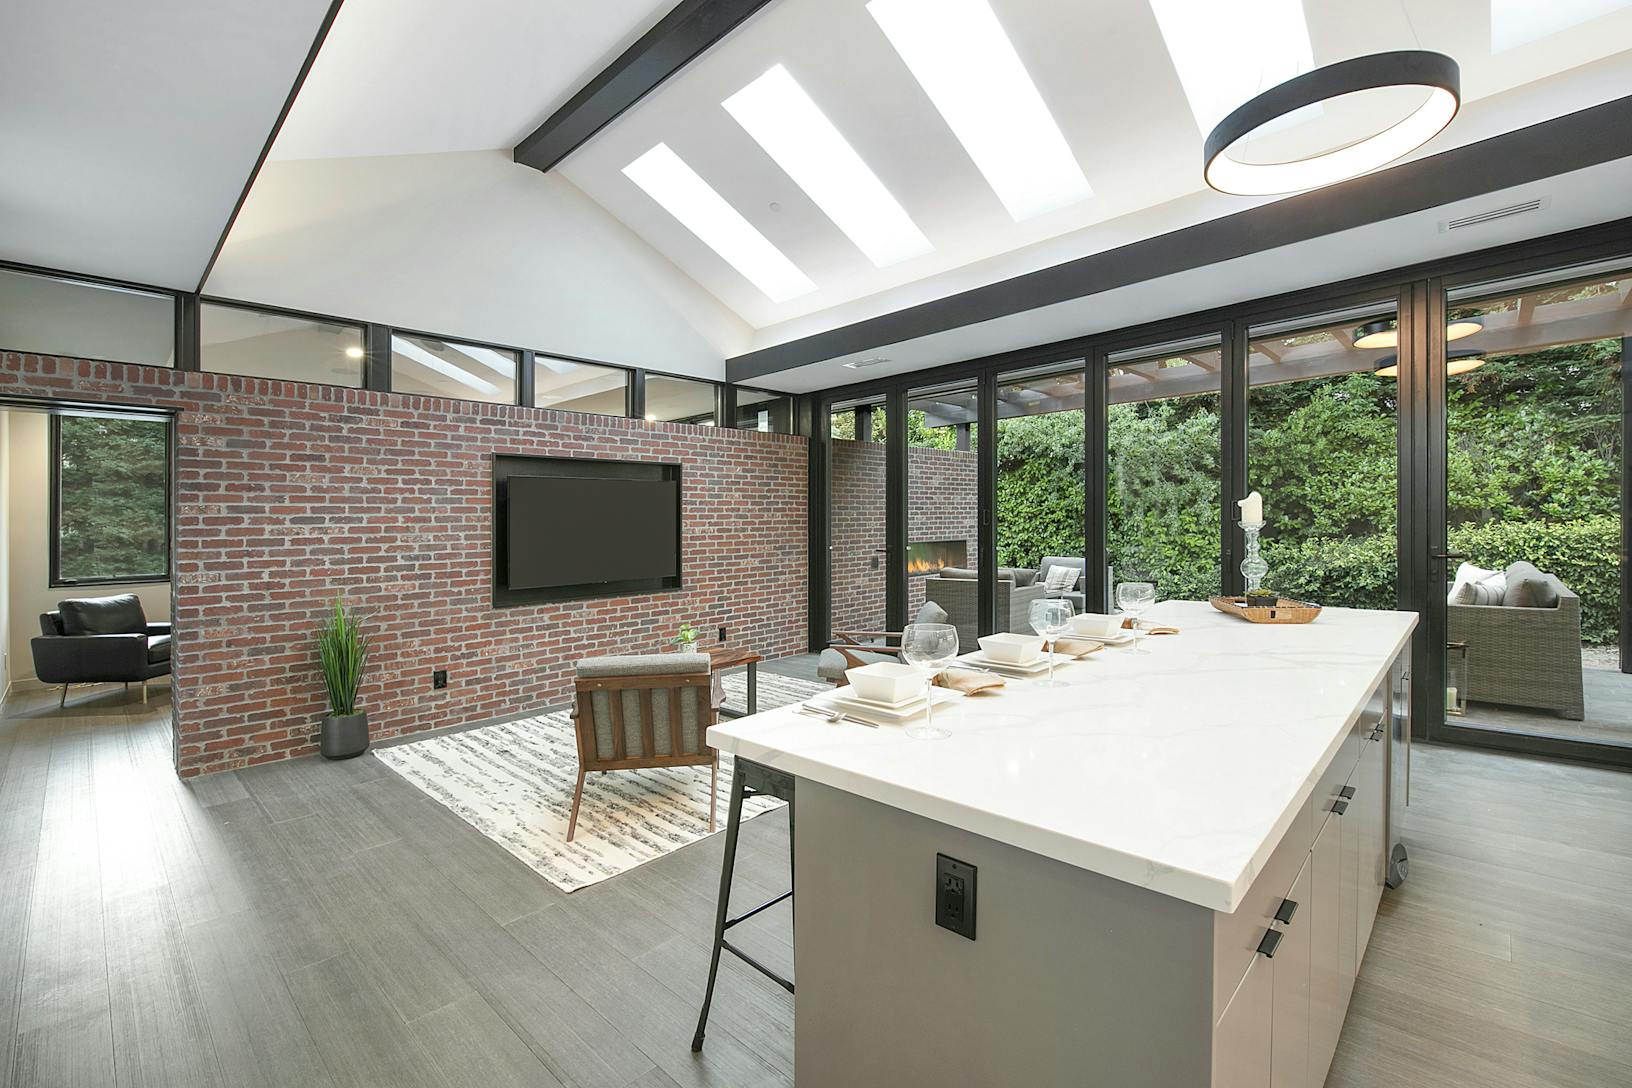 ADU modern kitchen with a brick wall and a TV, featuring an Aluminum Clad Folding Glass Wall for connecting to the outdoor patio area